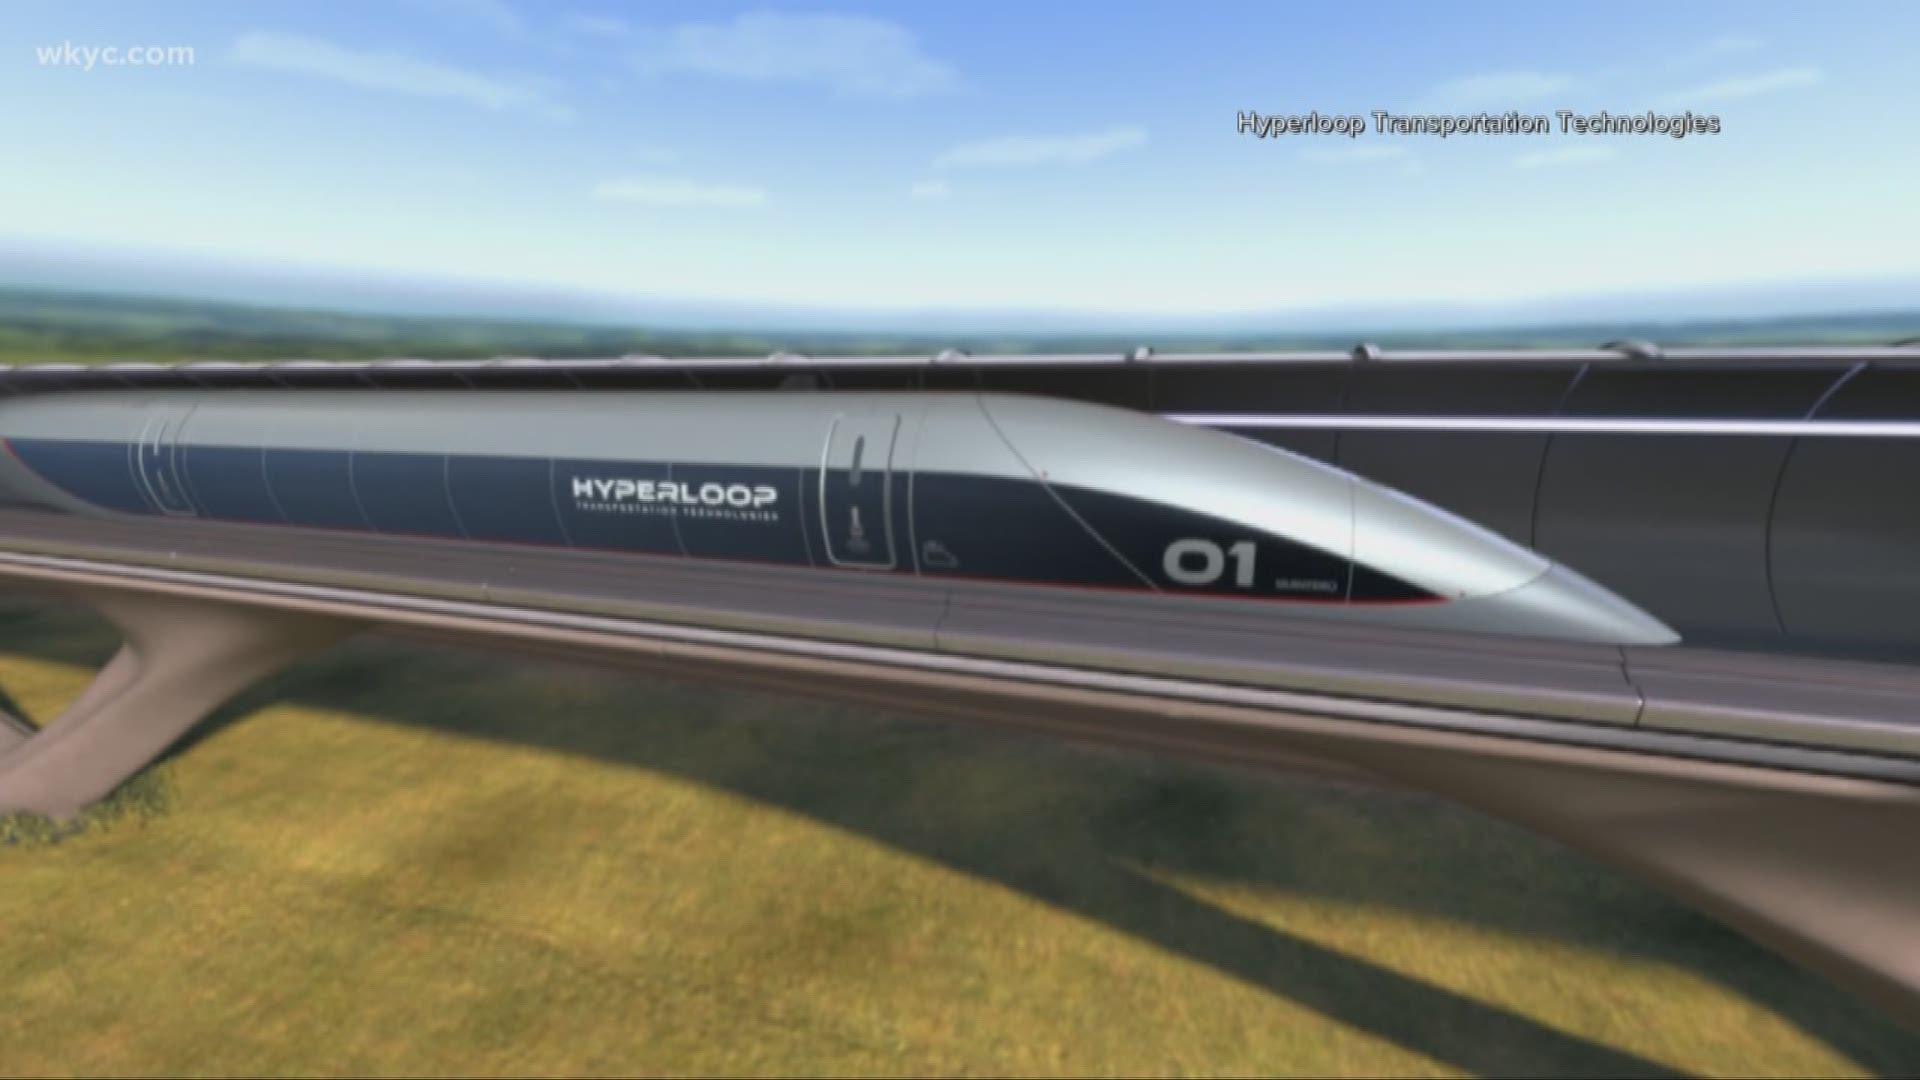 Aug. 13, 2019: With Hyperloop technology, it would be possible to live and Cleveland and work in Chicago with a commute that takes less than 30 minutes. But how close are we to a Hyperloop actually happening here in Cleveland? Dave Chudowsky sat down with Rob Miller, the Chief Marketing Officer for Hyperloop Transportation Technologies, to learn more about this high-speed travel.